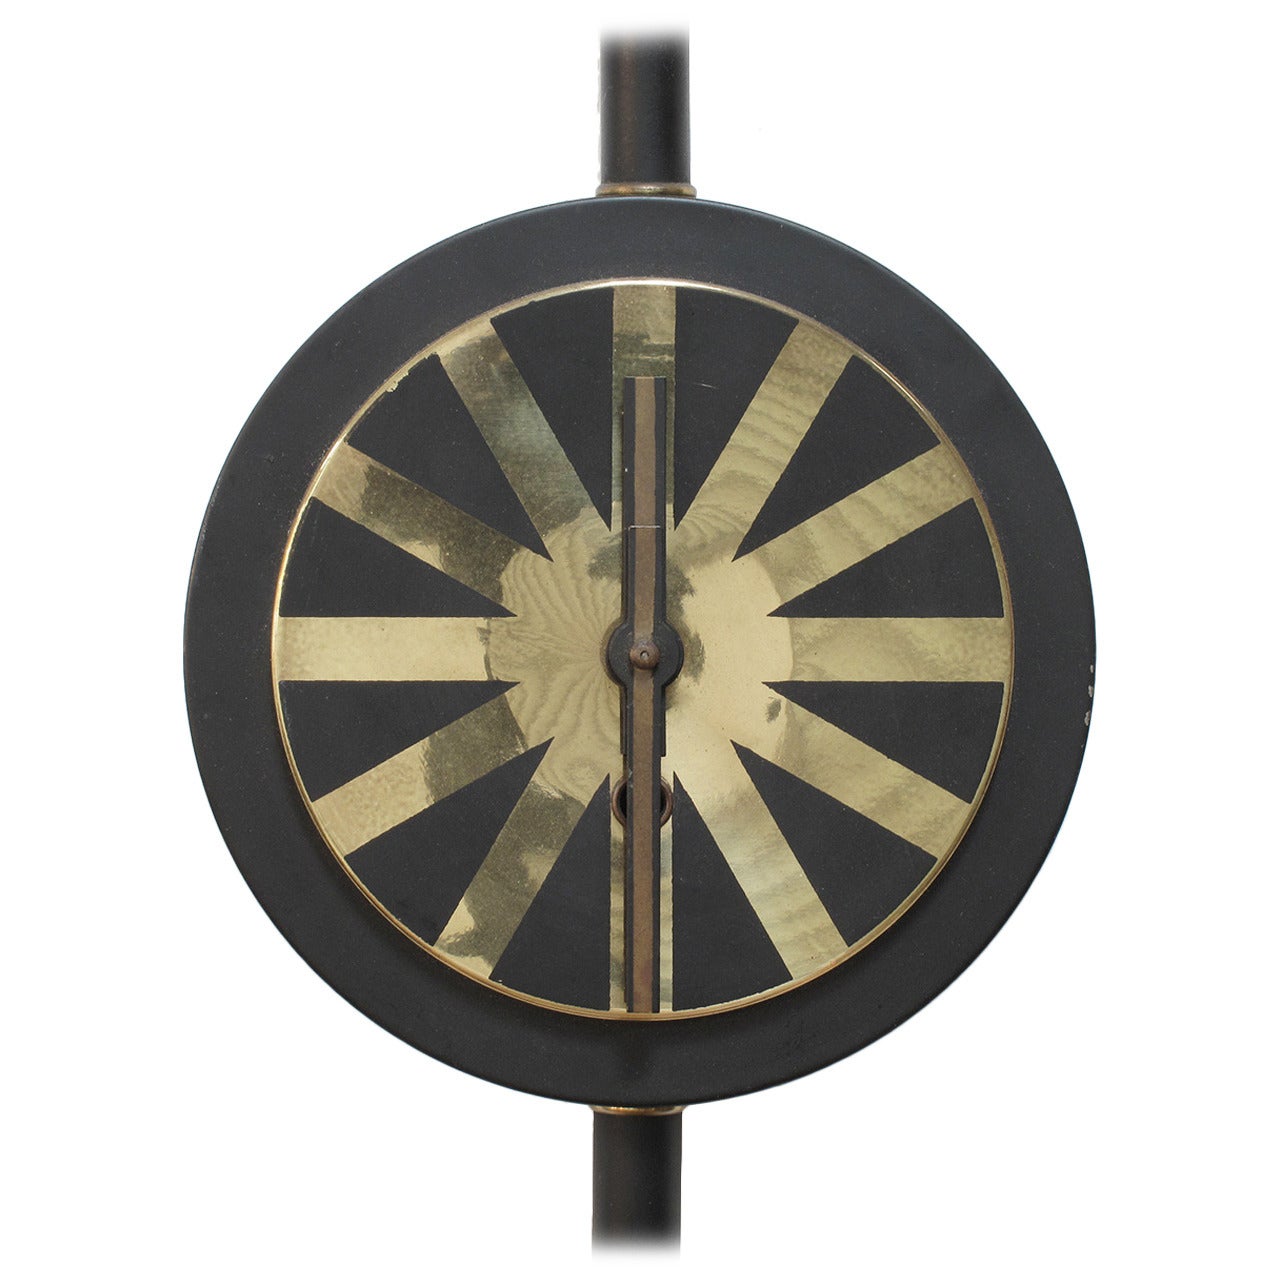 Modernist Wall Clock Made in Germany, 1957 For Sale